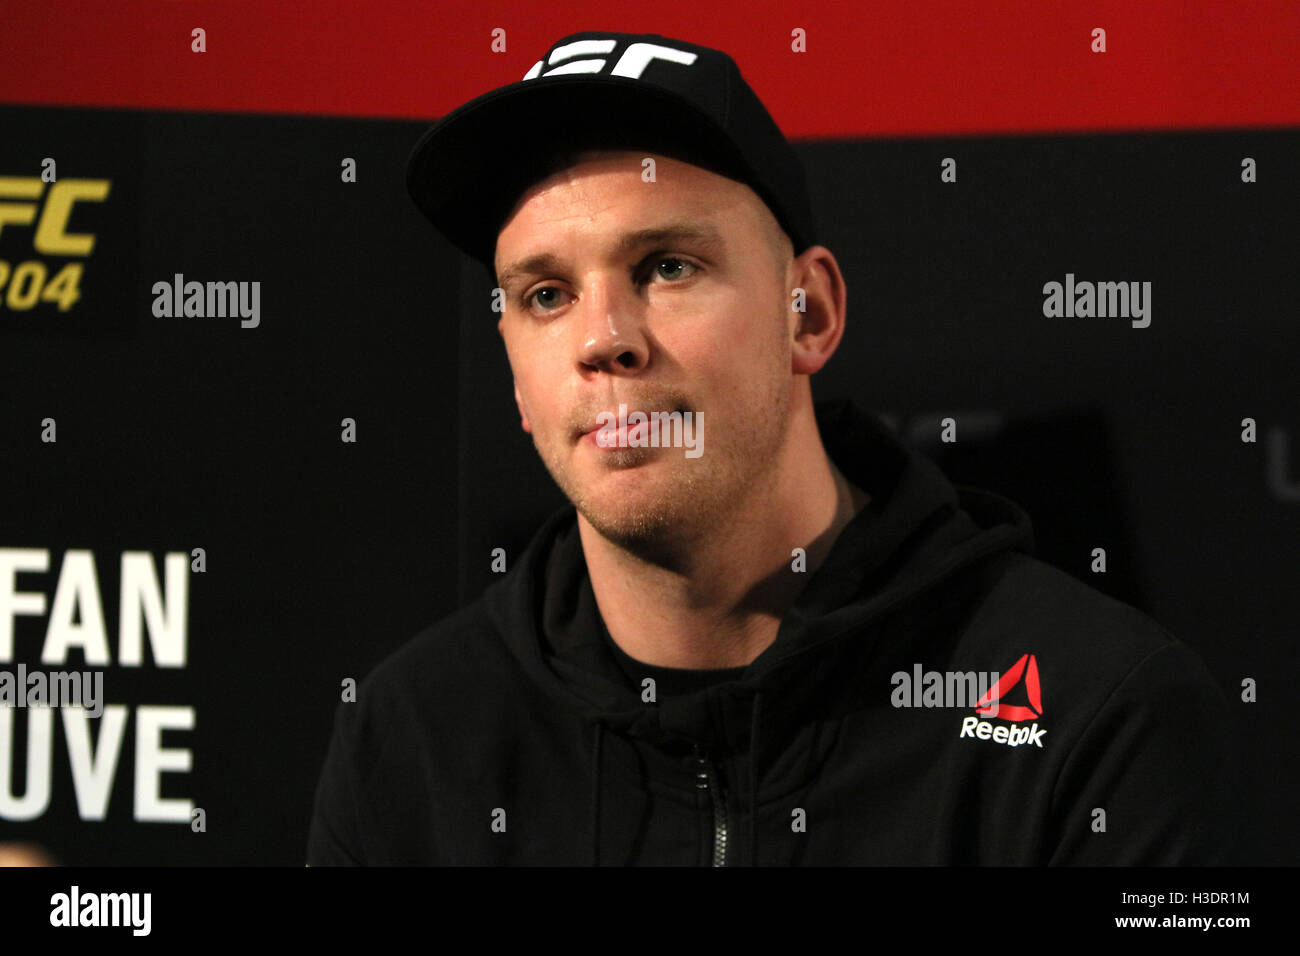 Manchester, UK. 6th October, 2016. UFC 204 - Media Day at Arena Manchester. Thursday the 6 of Oct. 2016 Stefan Struve answers media questions ahead of UFC 204.   Credit:  Dan Cooke/Alamy Live News Stock Photo